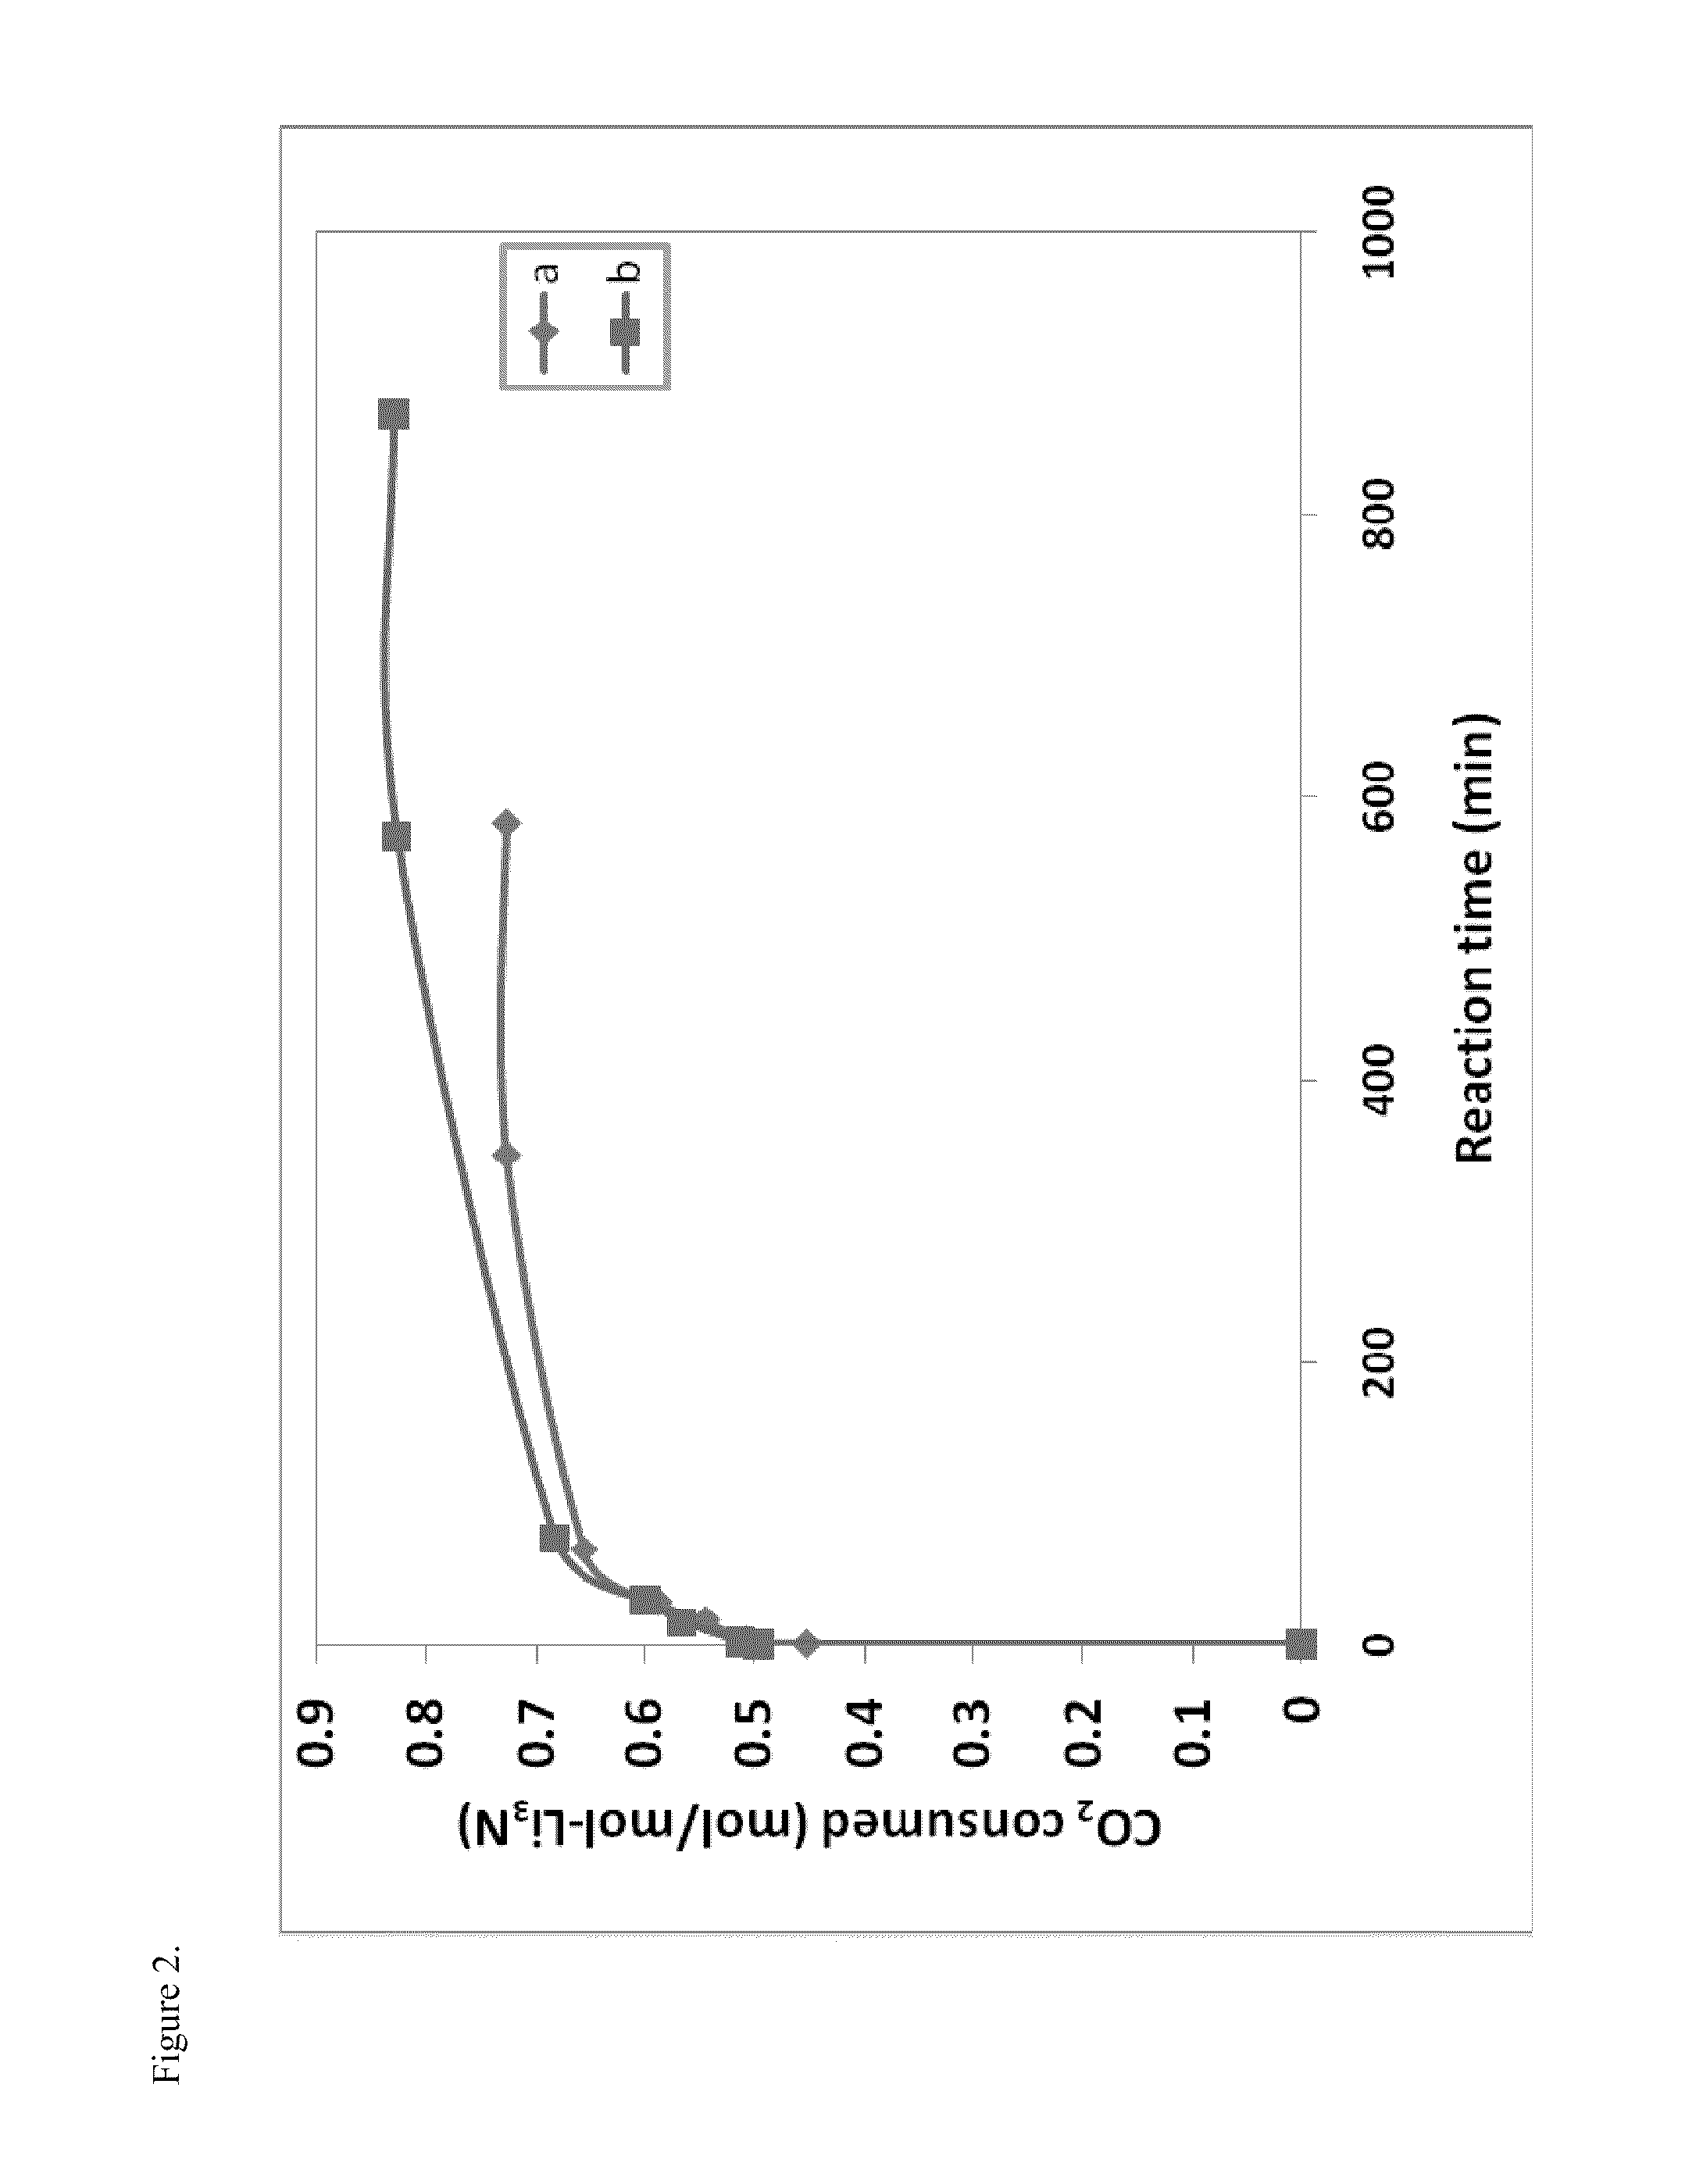 Synthesis of carbon nitrides from carbon dioxide